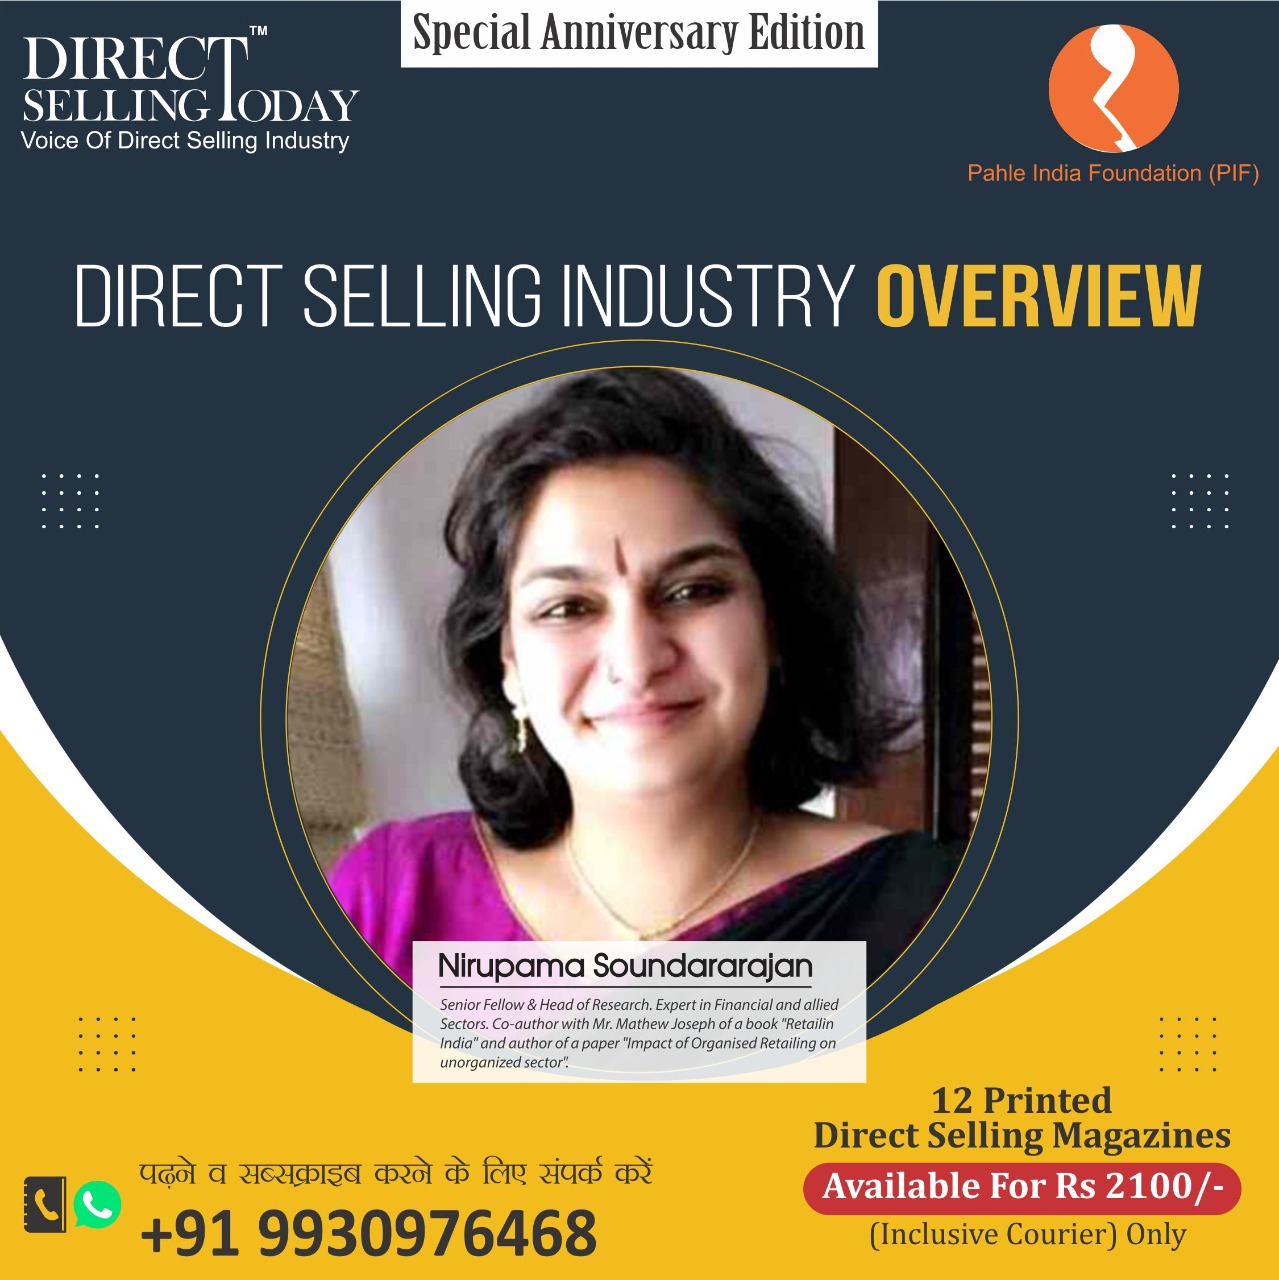 DIRECT SELLING INDUSTRY OVERVIEW